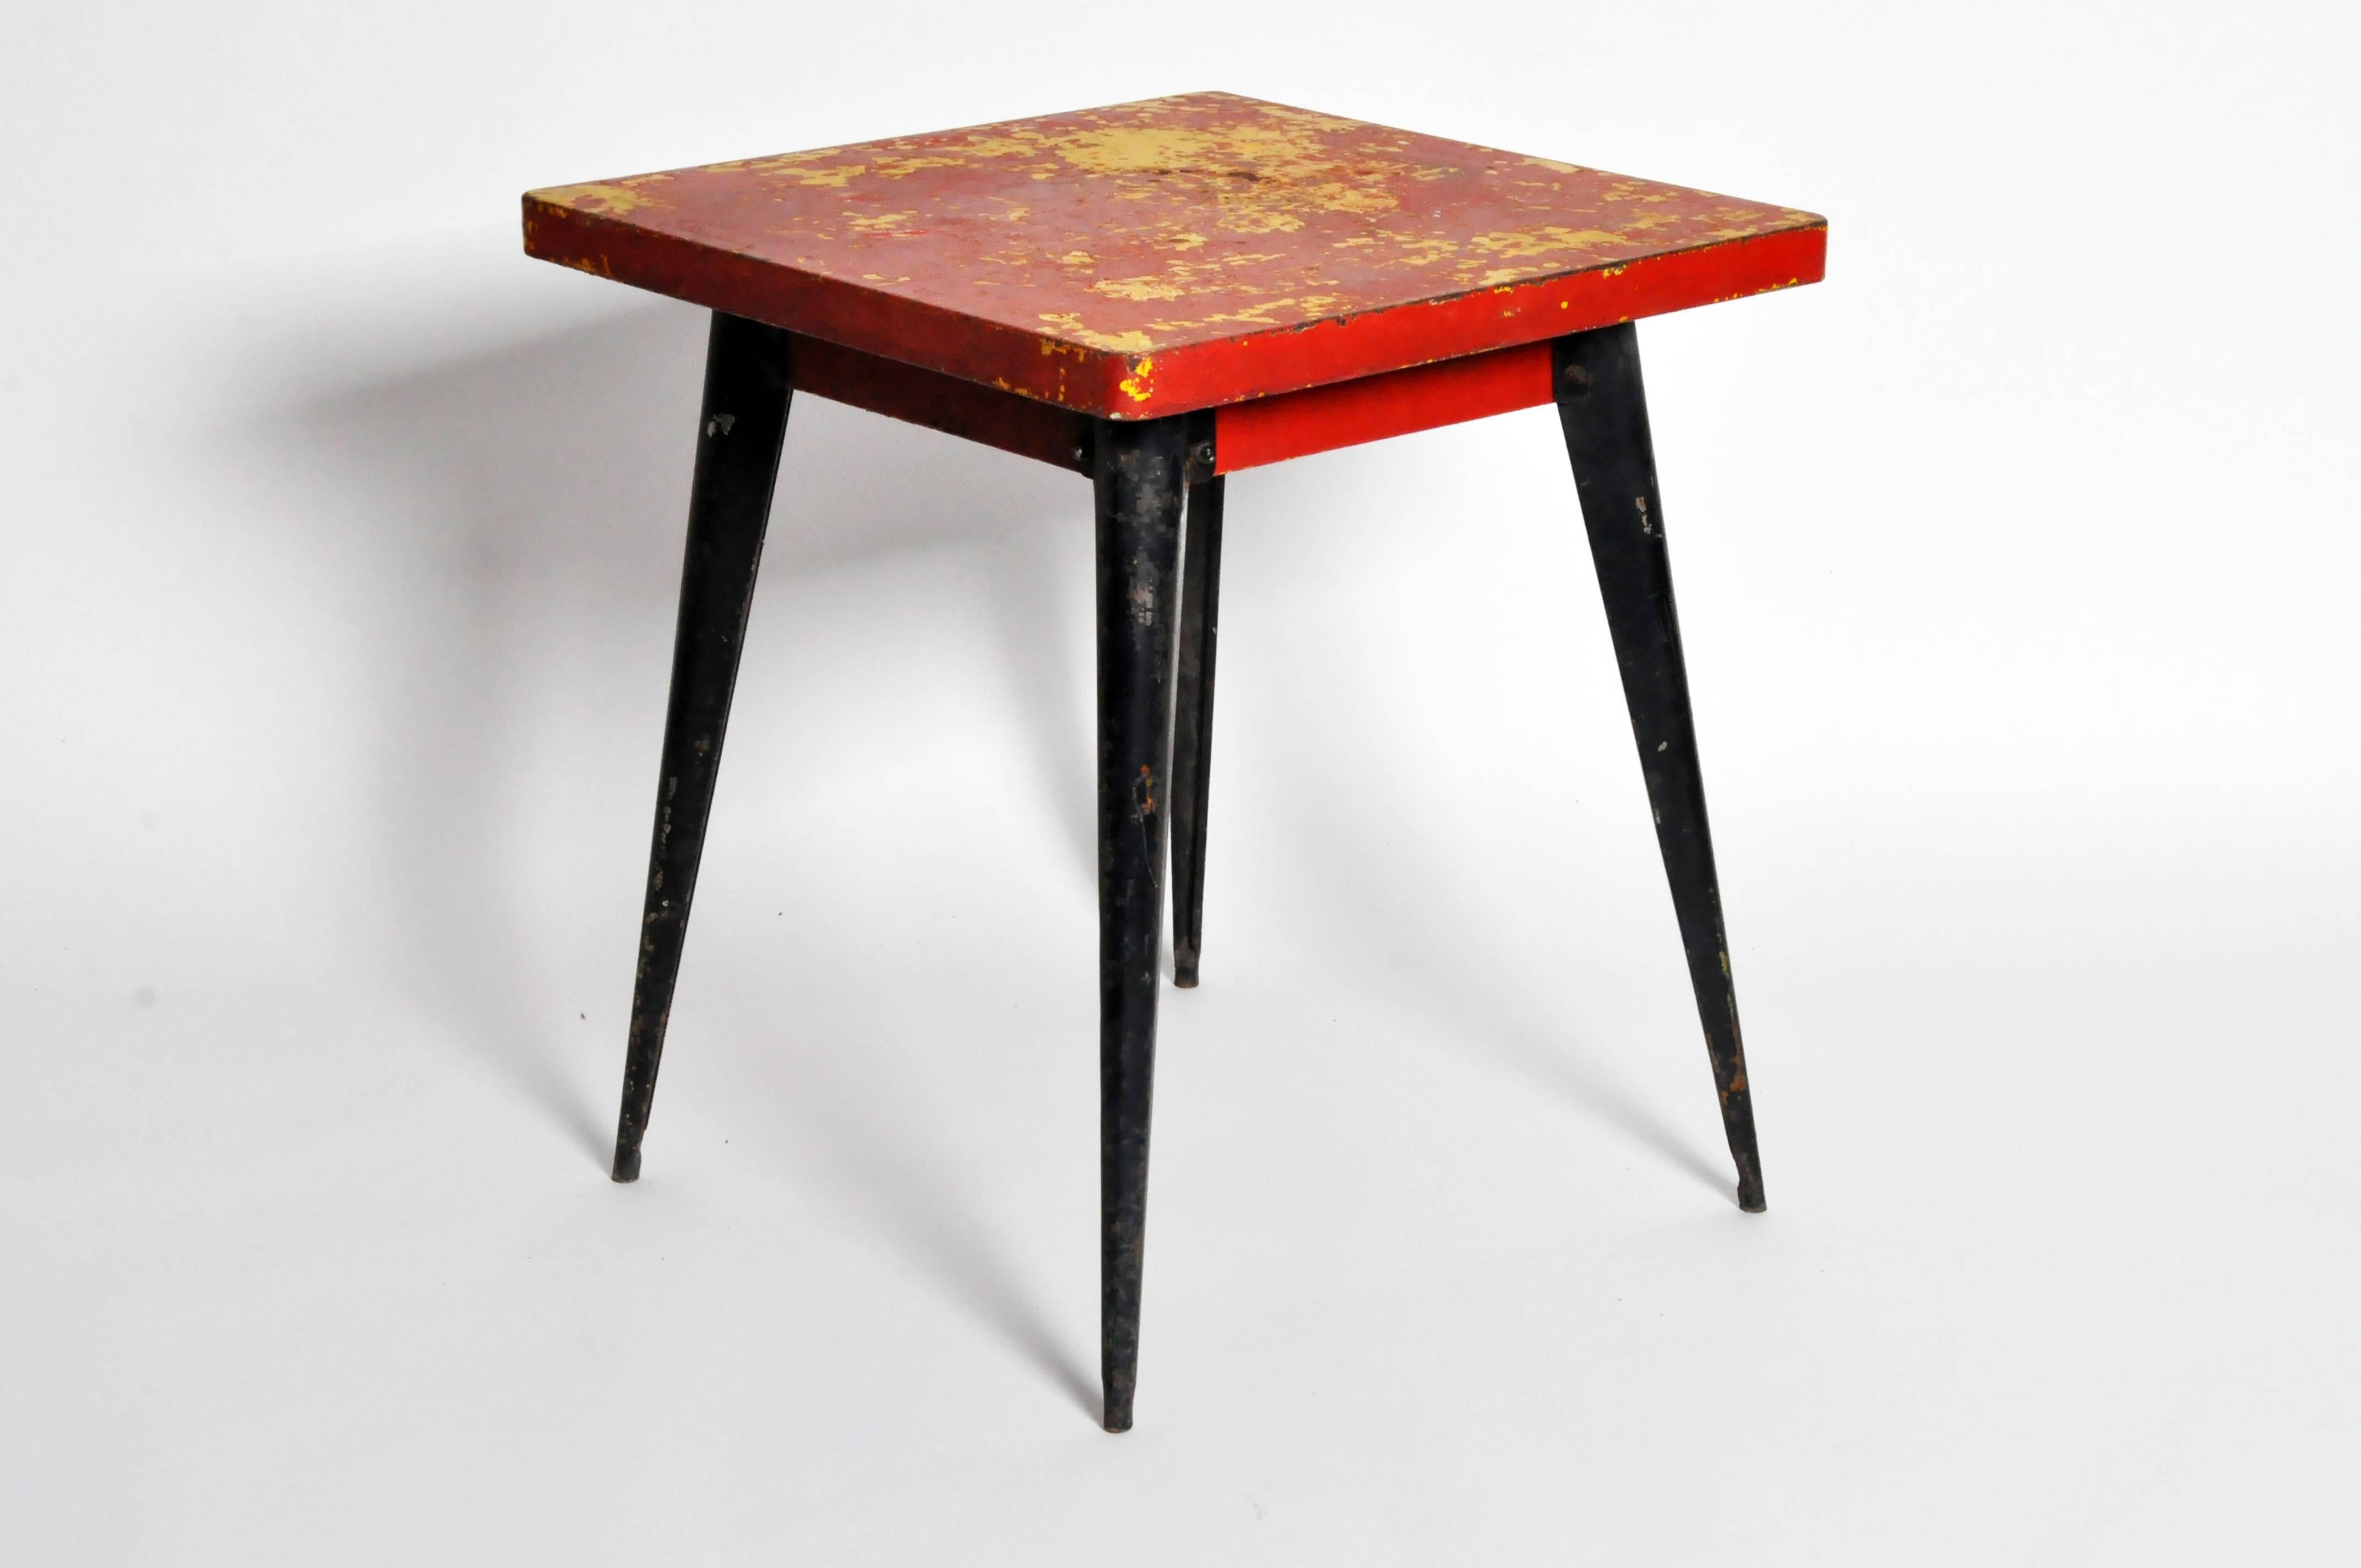 Red Metal Café Table by Tolix.  Clean, modern lines paired with beautifully-aged patina lend this piece a smart, industrial aesthetic.  Red and yellow tabletop measures 25.75